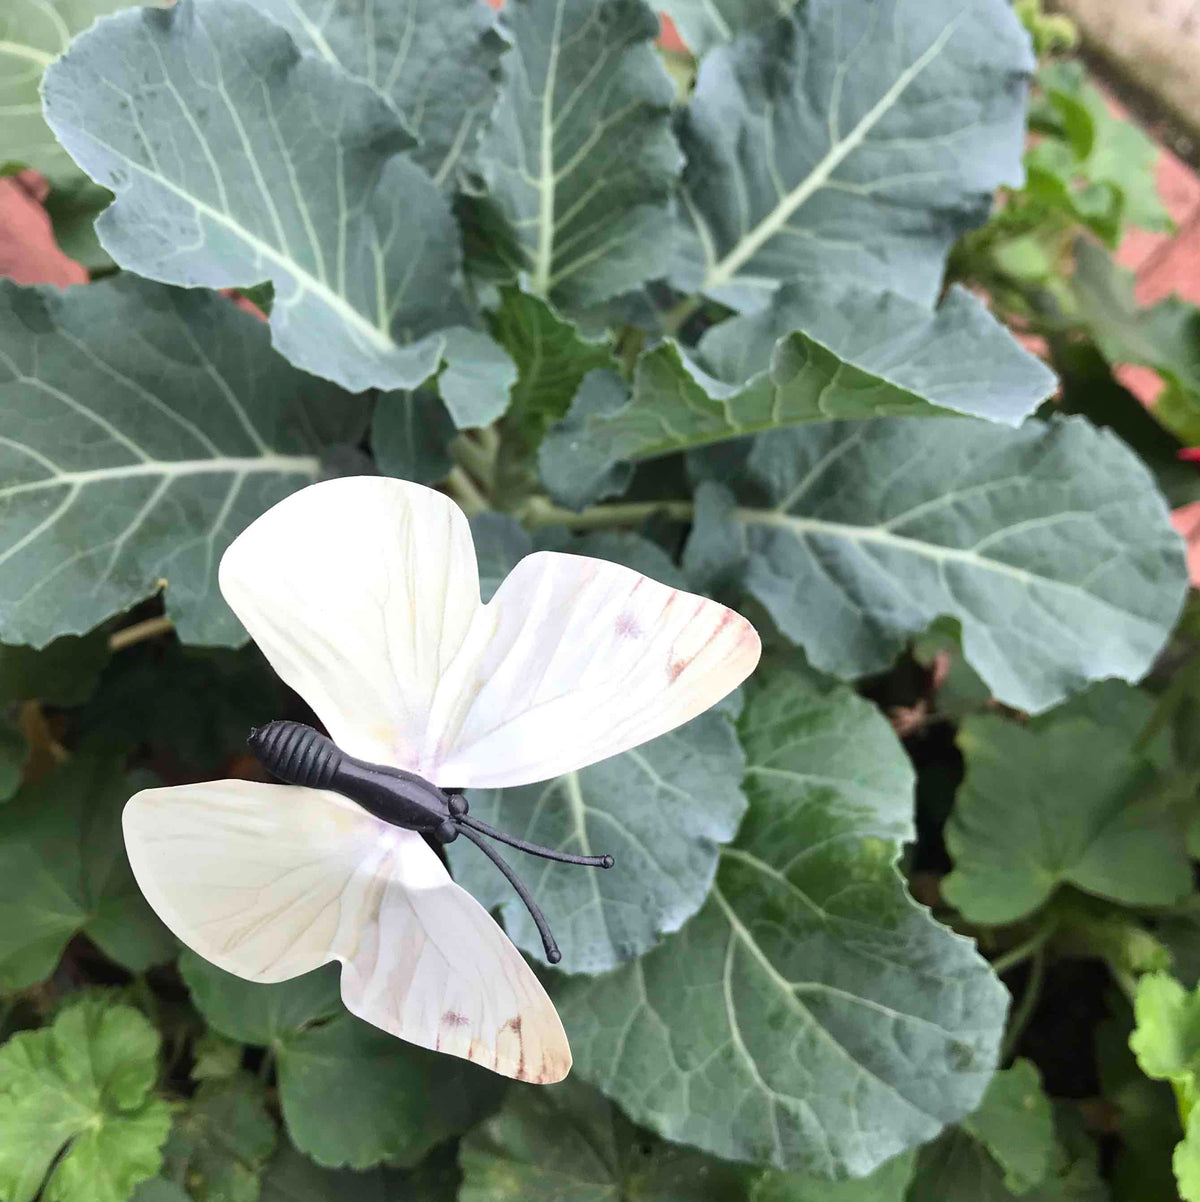 Cabbage White Butterfly or Cabbage Moth Decoys